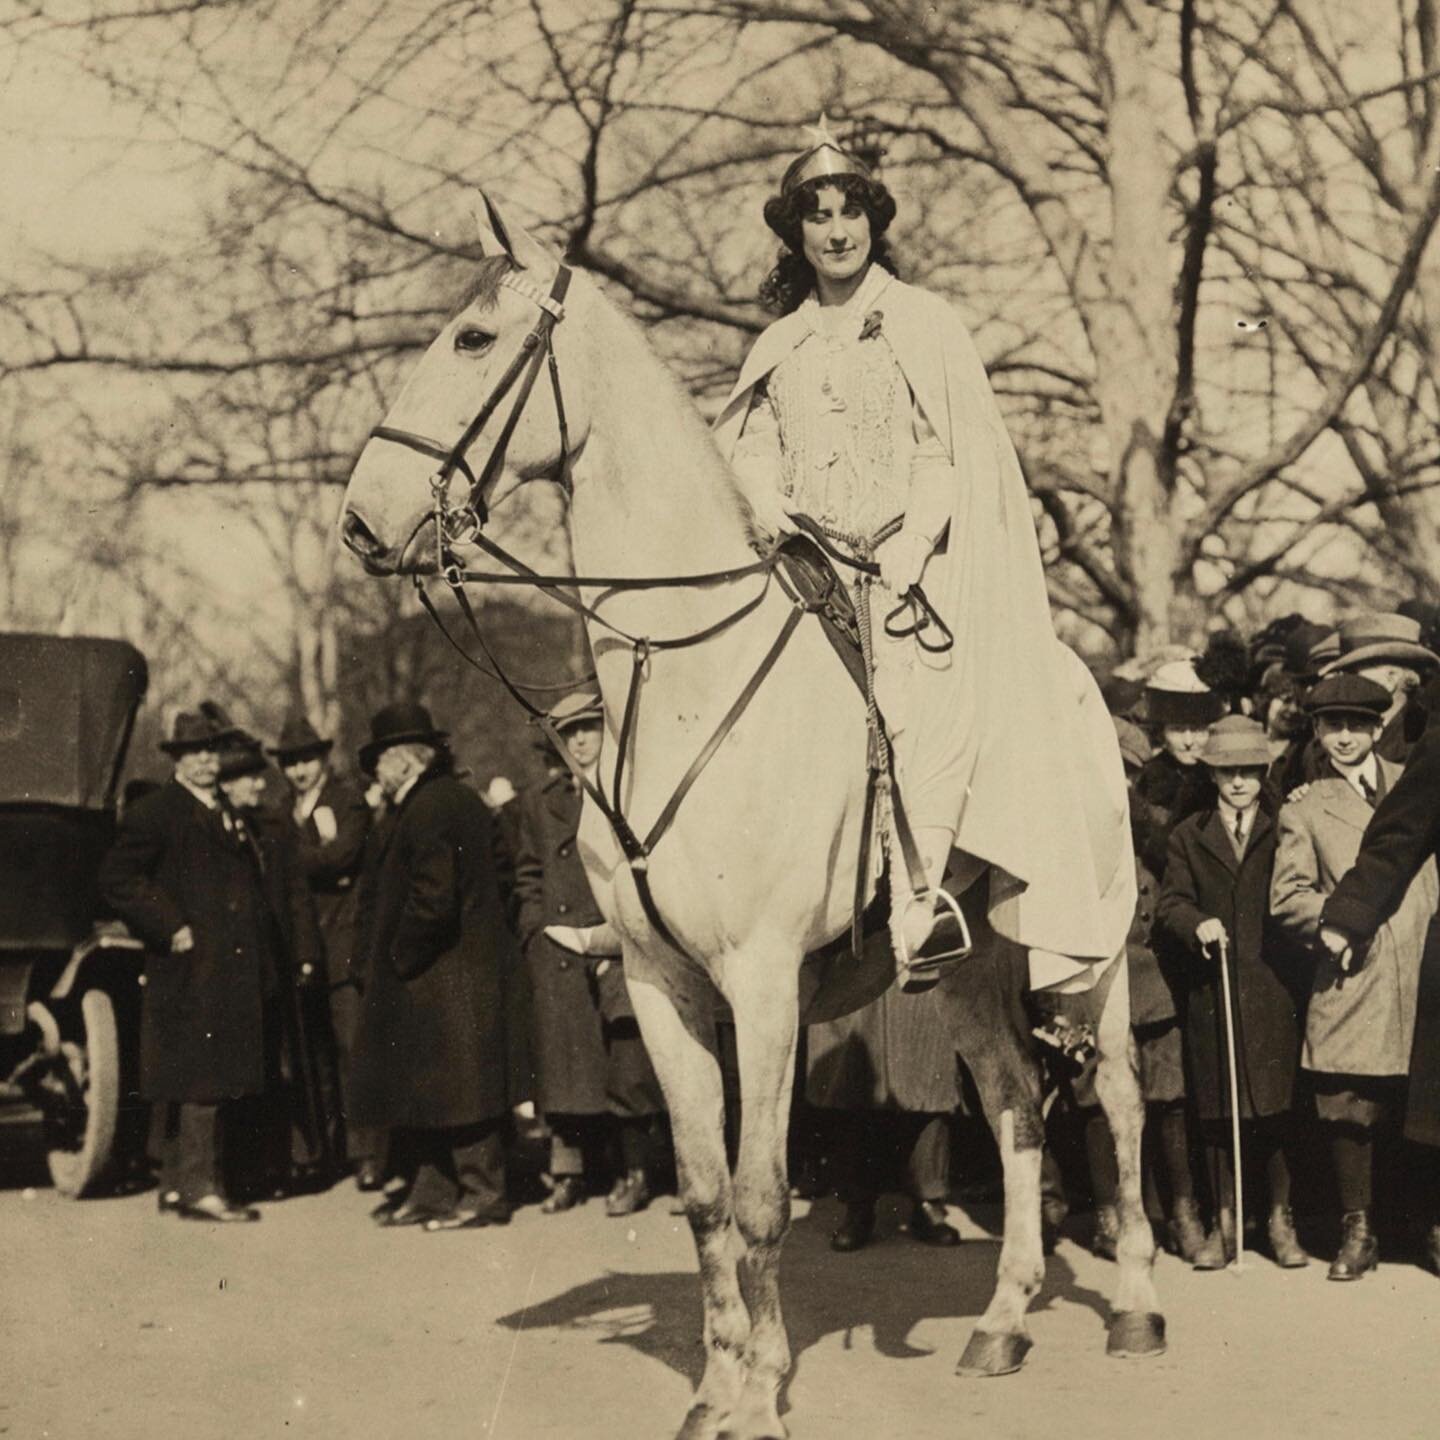 Inez Milholland, known as &ldquo;the most beautiful suffragist&rdquo; and the personification of the &ldquo;Modern Woman&rdquo; died Nov 26, 1916, to then become the martyr of the women&rsquo;s movement. 

On March 3, 1913, Milholland led the histori